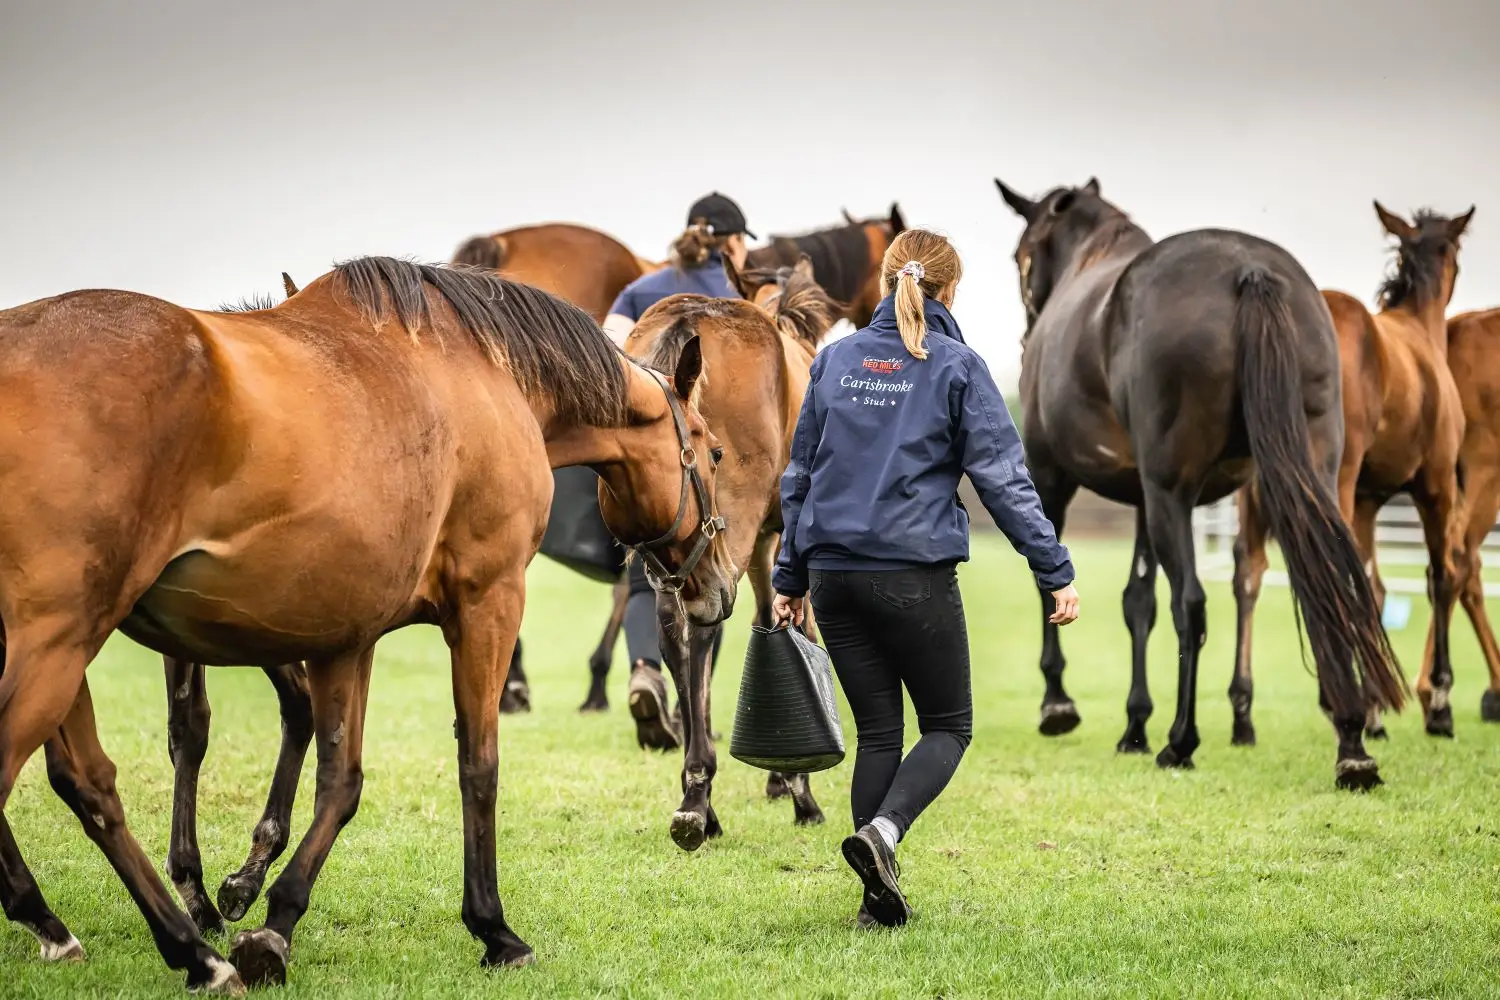 Can Diet Influence Broodmare Fertility?